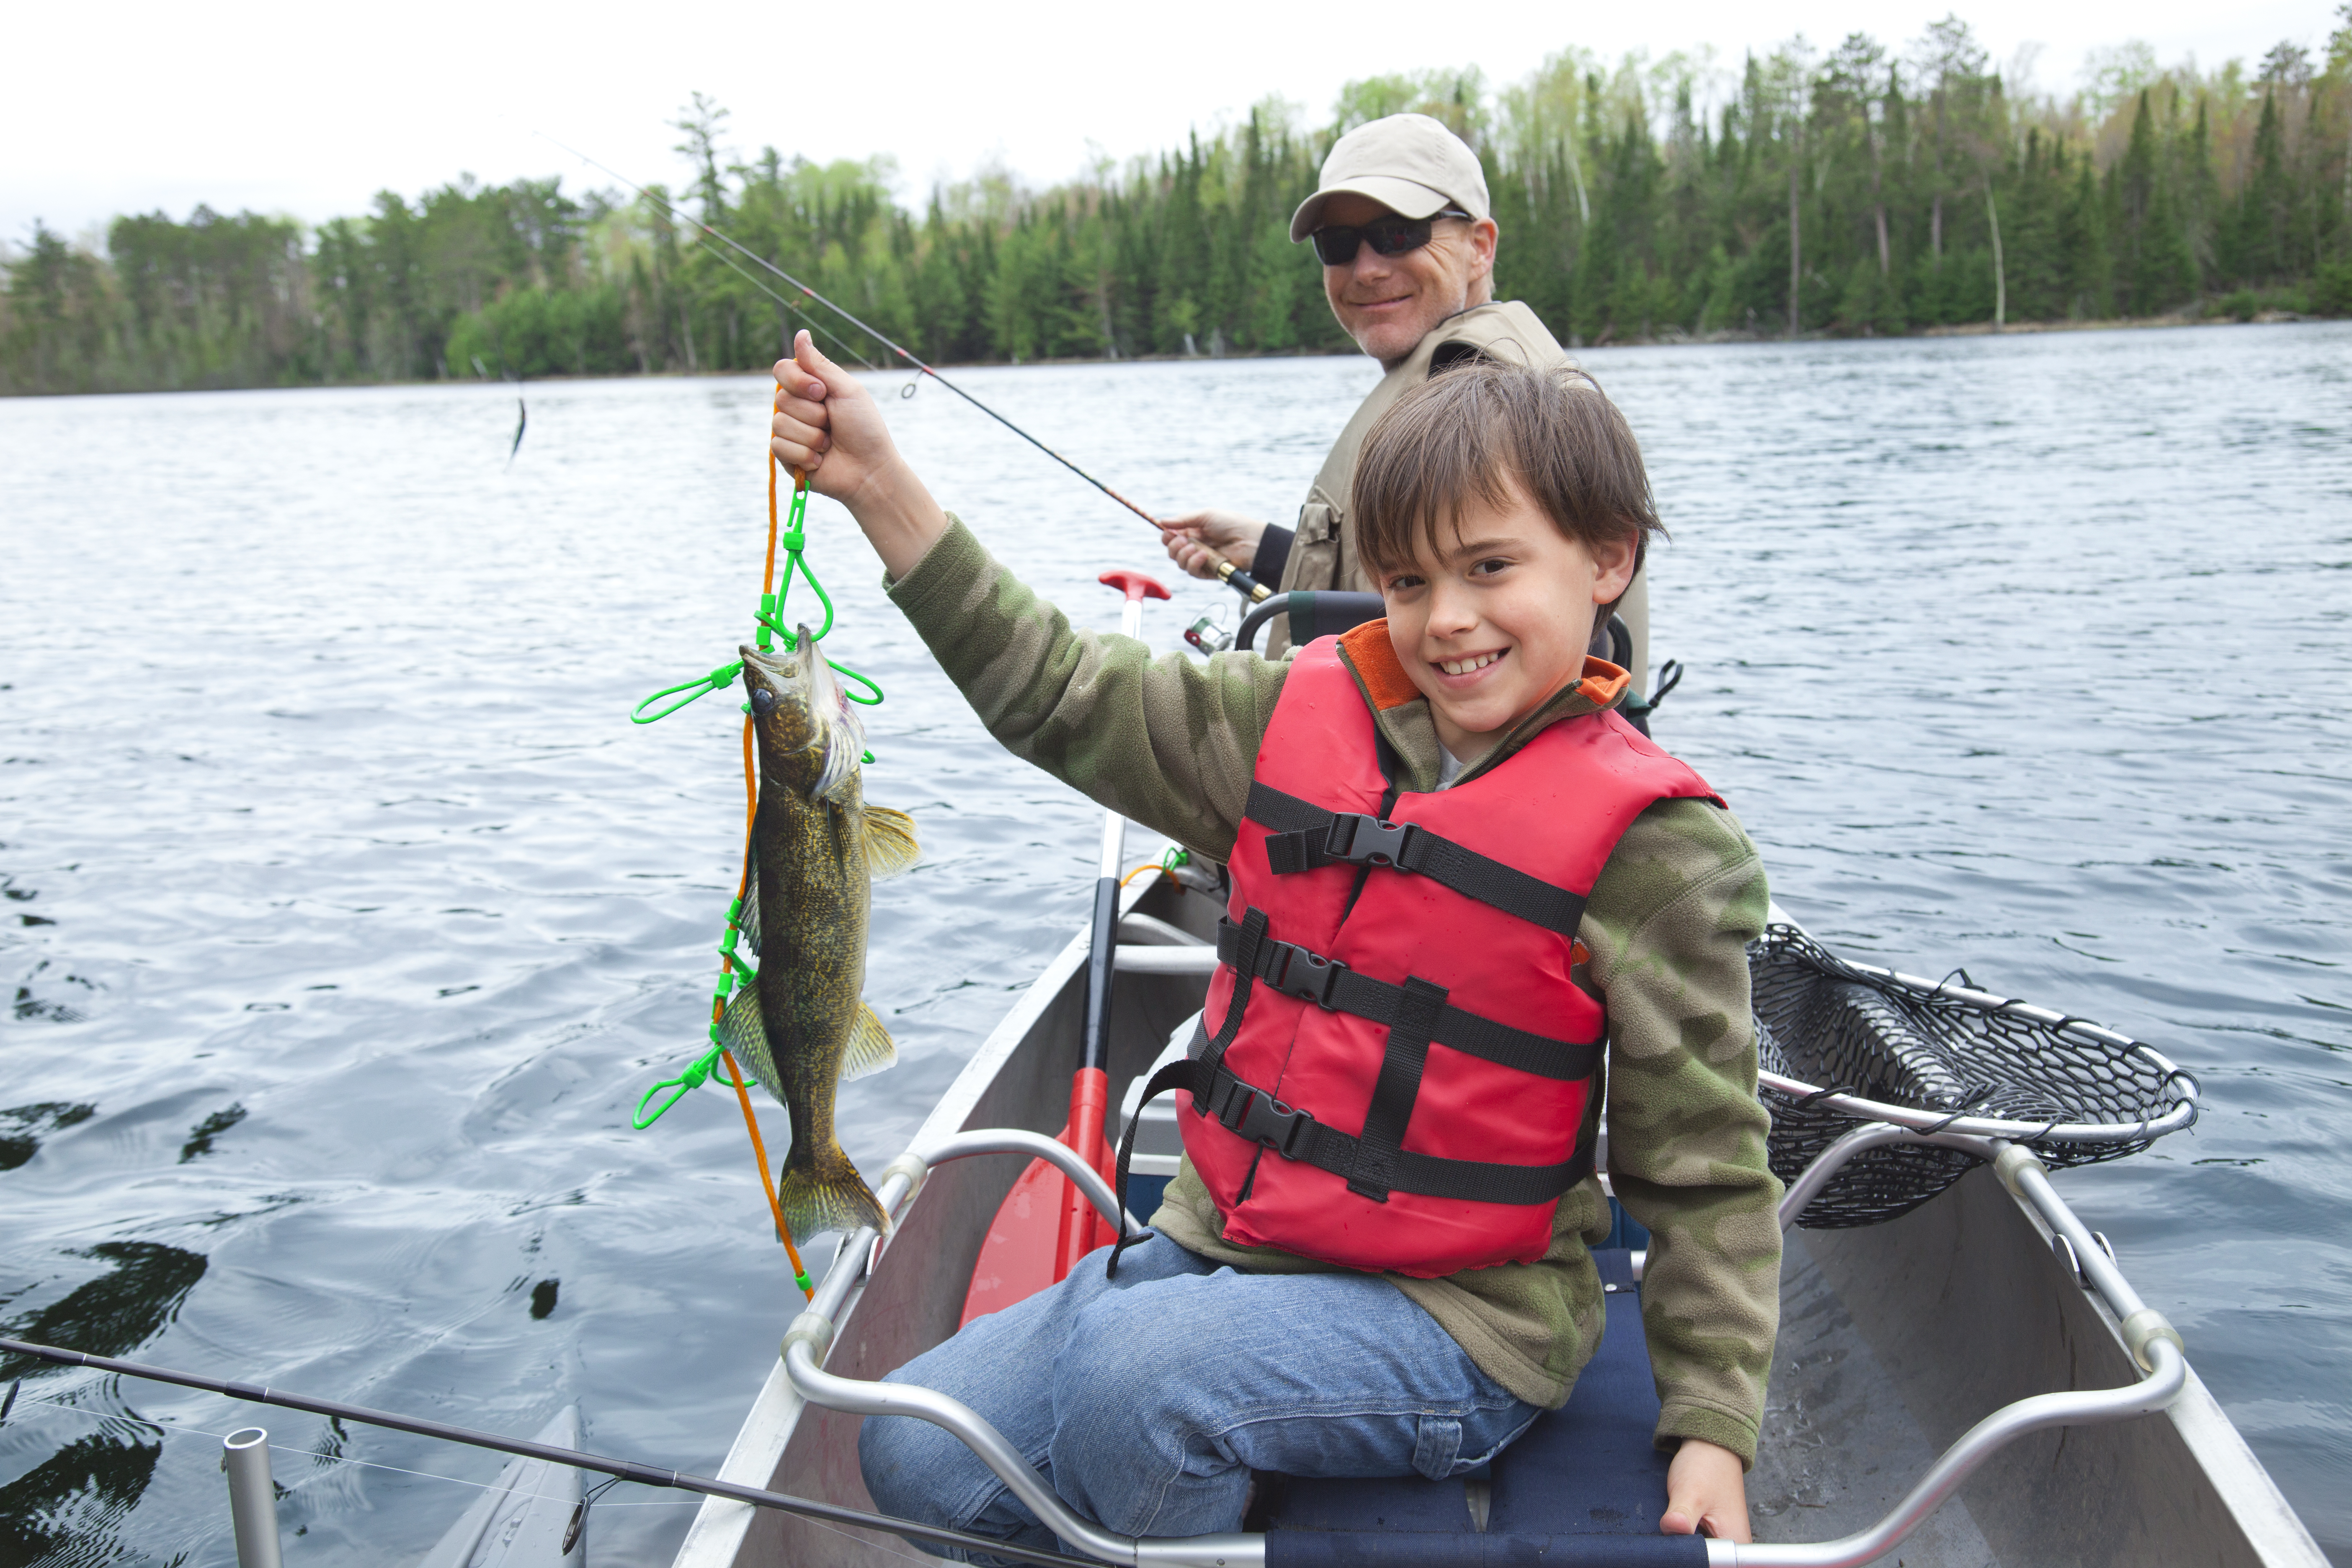 Boy smiling and wearing a life jacket while holding up a fish